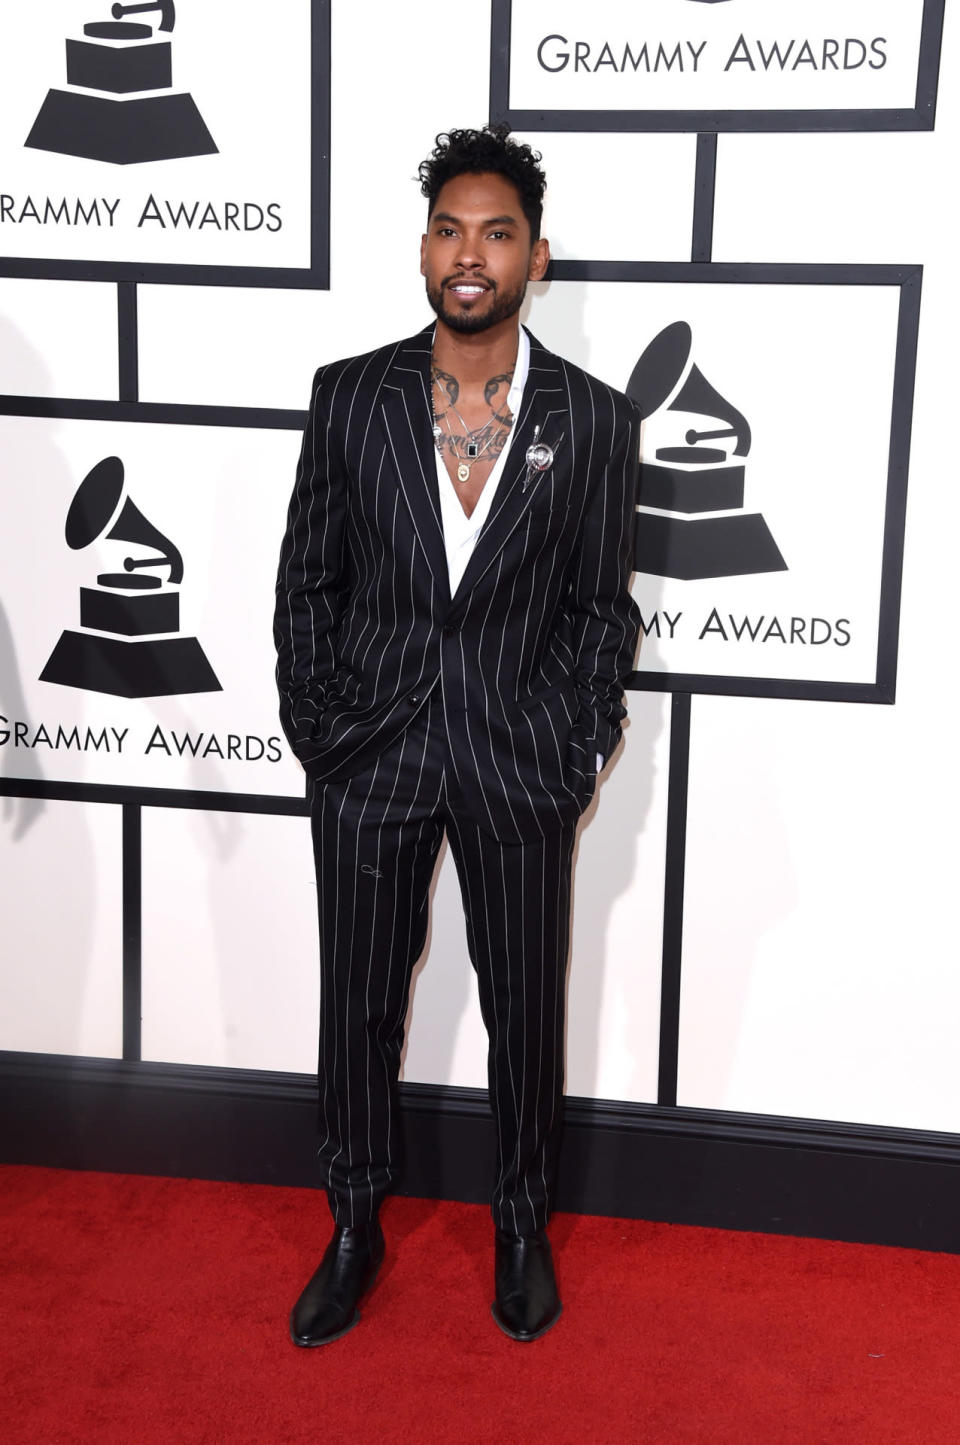 Best: Miguel in a striped suit with a low-cut top at the 58th Grammy Awards at Staples Center in Los Angeles, California, on February 15, 2016.